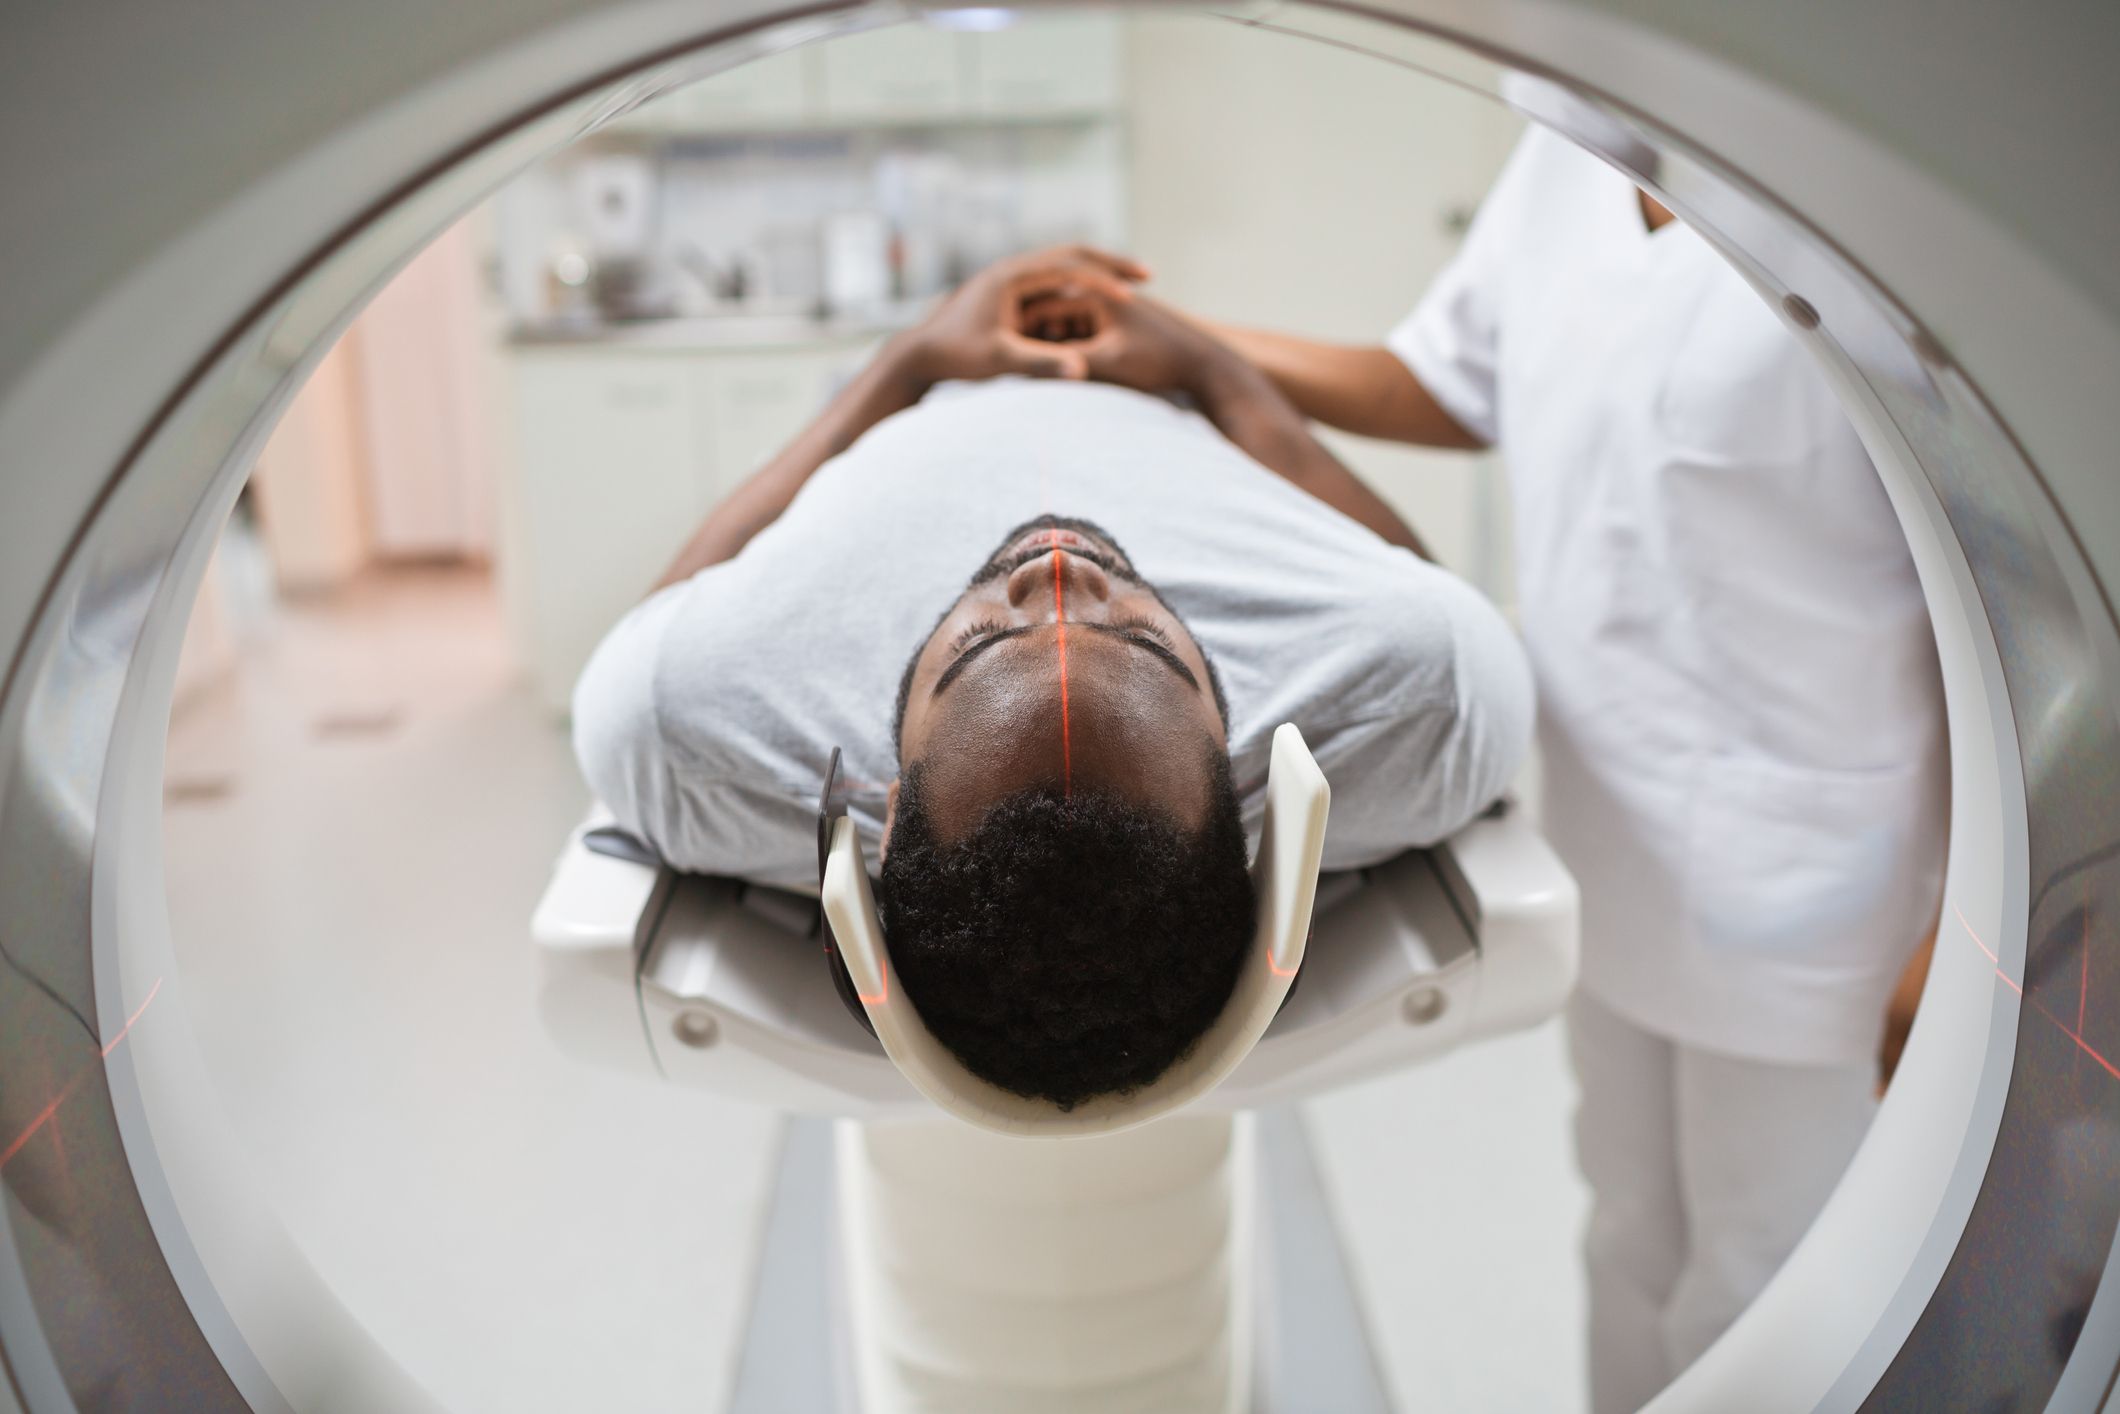 Should You Get a Full-Body MRI Scan? Experts Weigh In